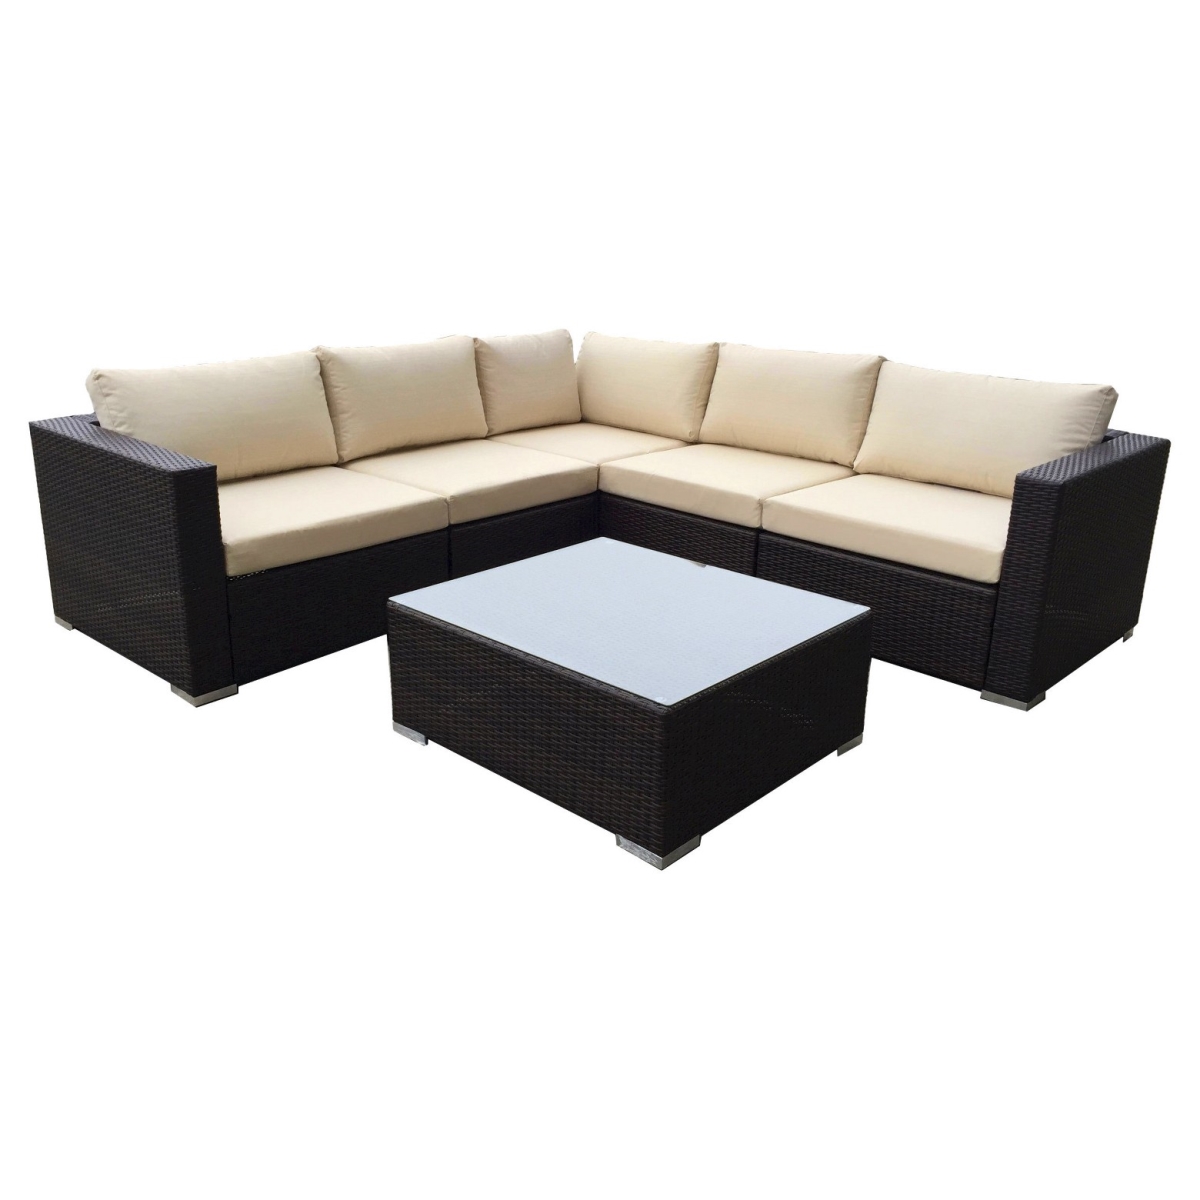 6 Piece Wicker Seating Set With Ivory Cushion